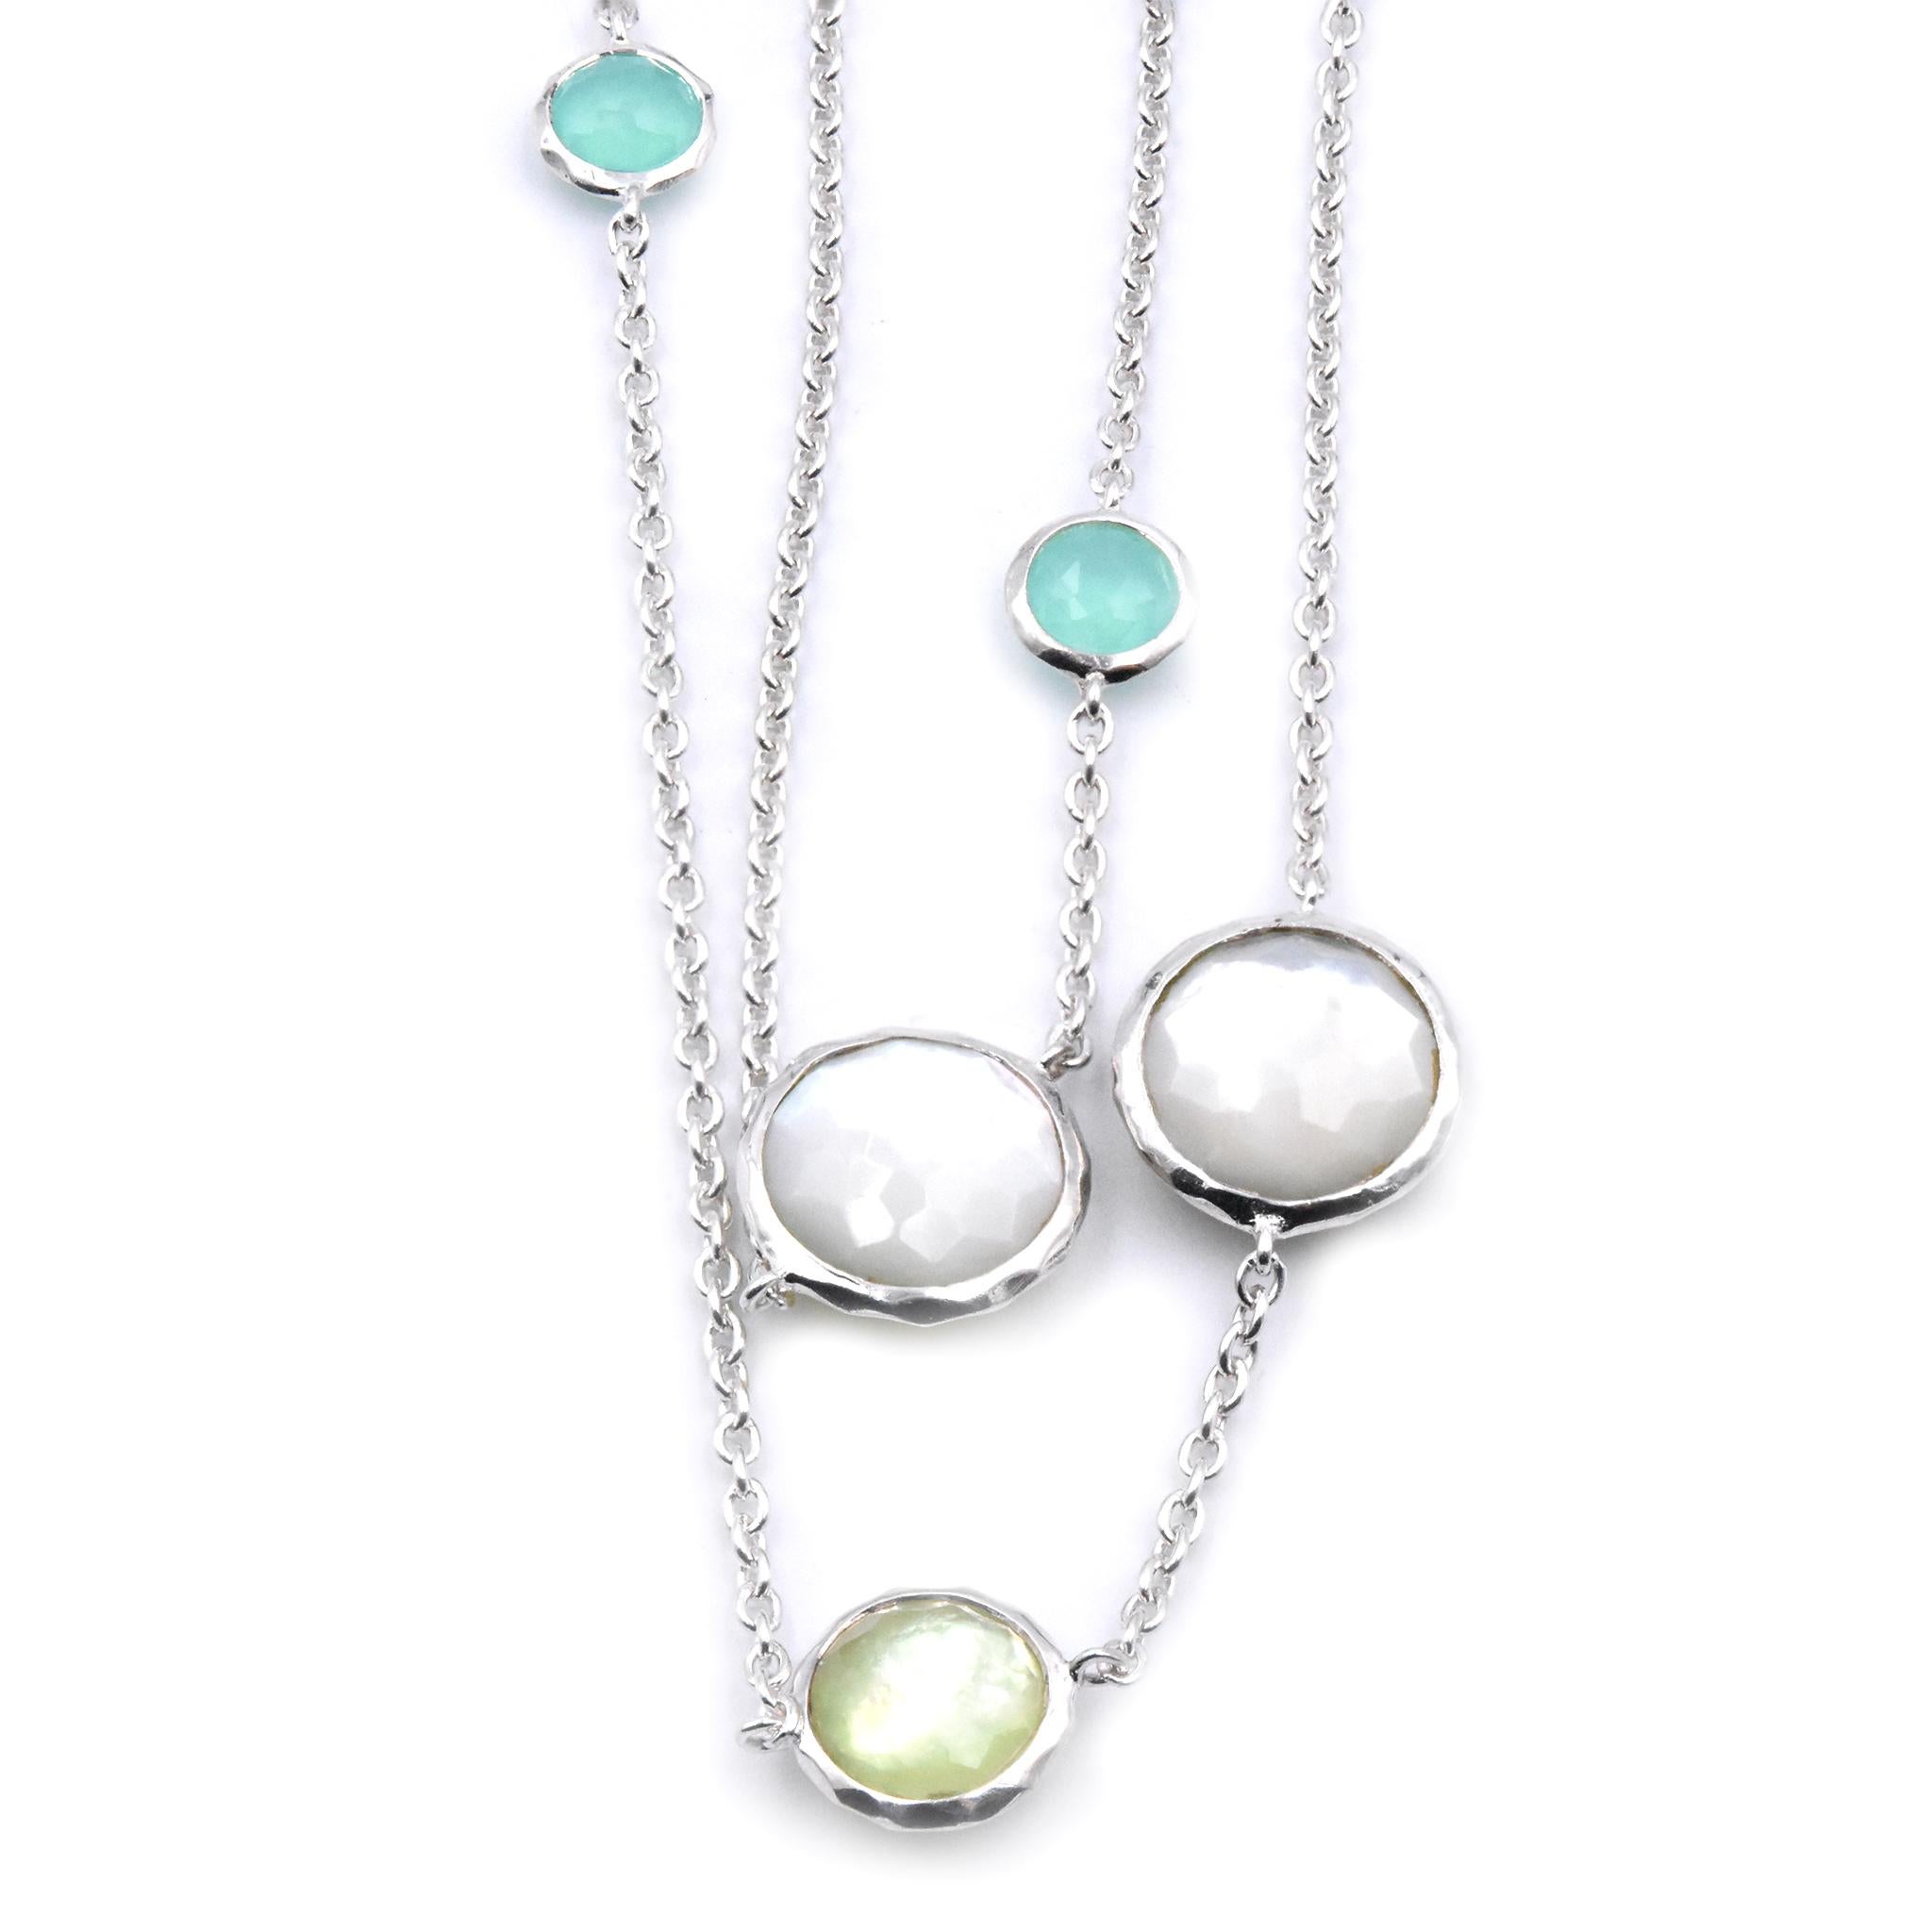 Designer: Ippolita
Material: Sterling Silver 
Gemstone: mother of pearl and green quartz
Dimensions: necklace measures 34-inches in length
Weight: 65.8 grams